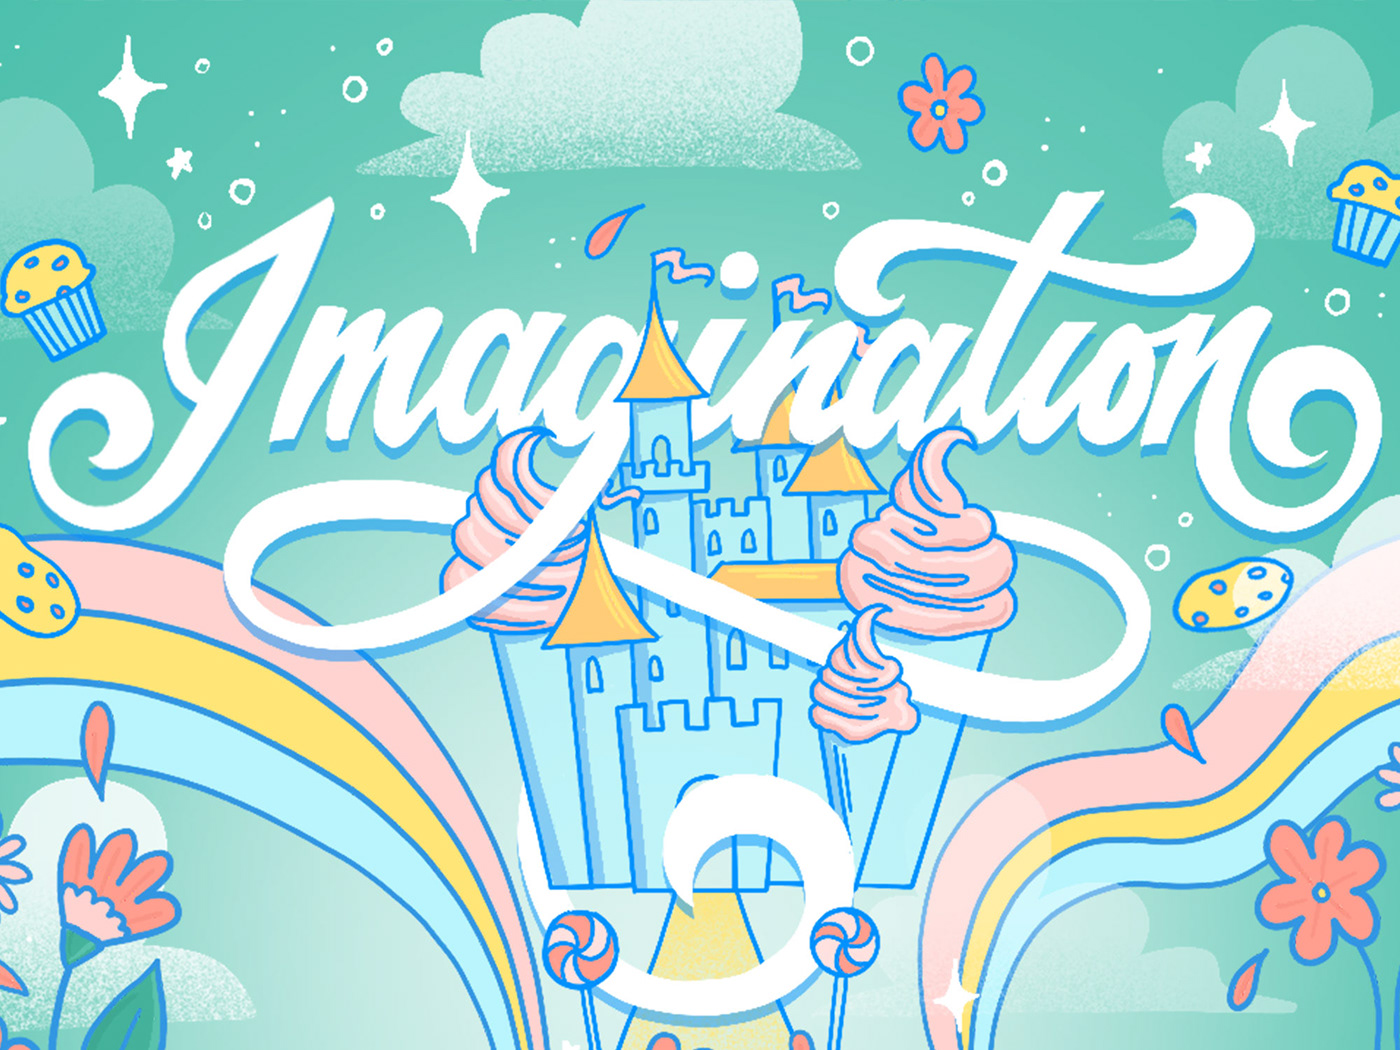 Magical digital illustration on photo featuring "Imagination" in script lettering and a castle